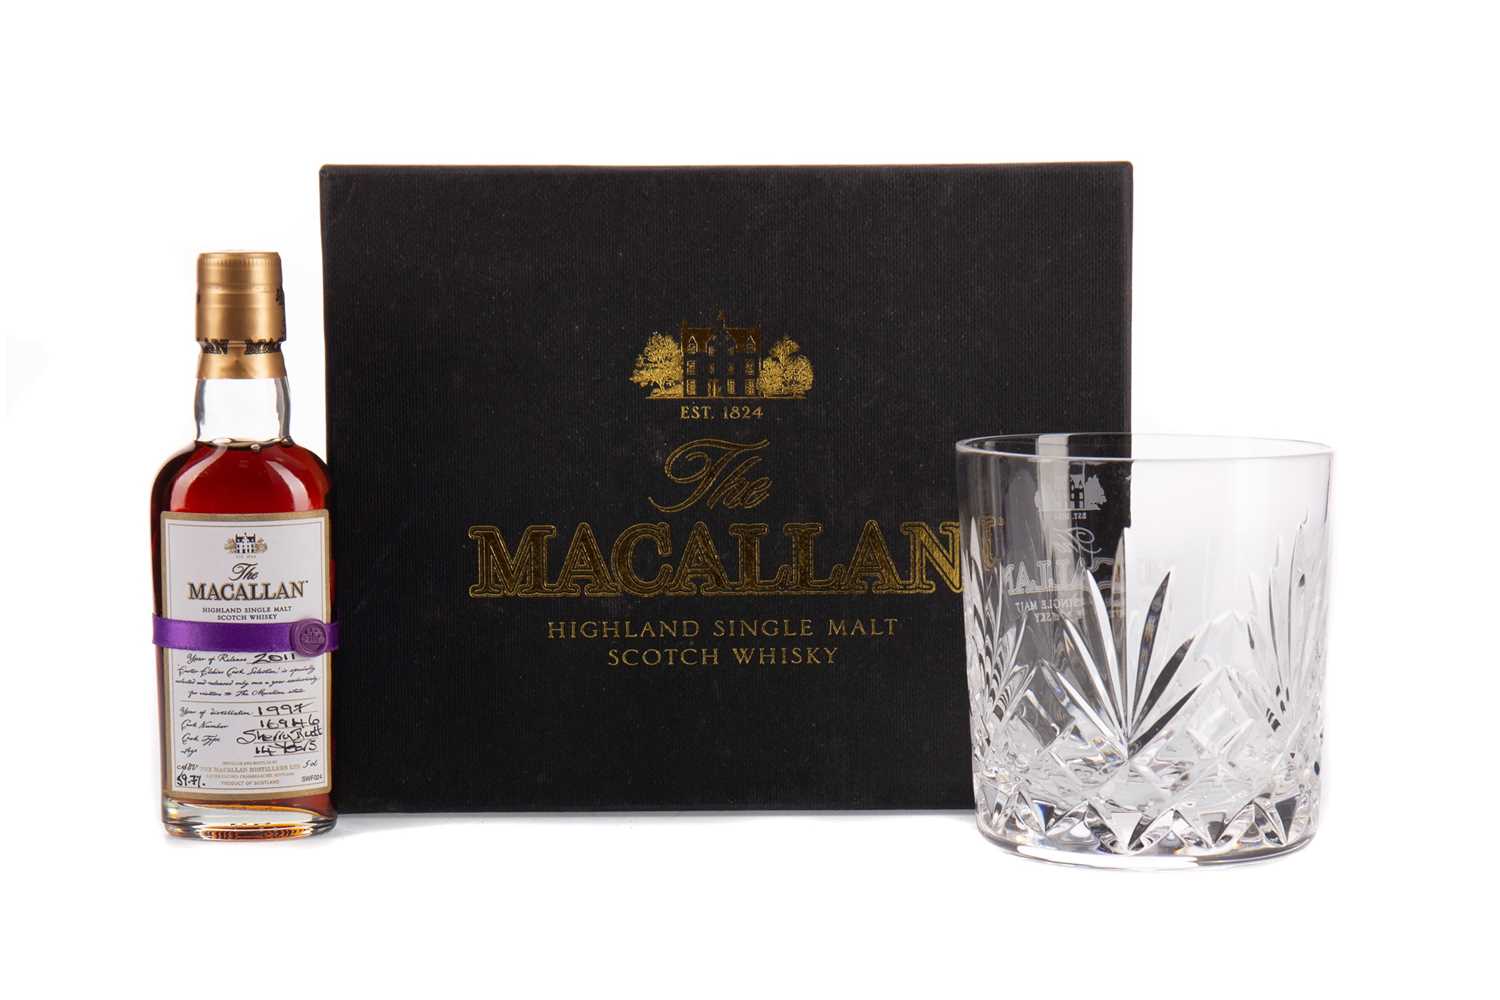 Lot 179 - MACALLAN 1997 EASTER ELCHIES 2011 AGED 14 YEARS MINIATURE